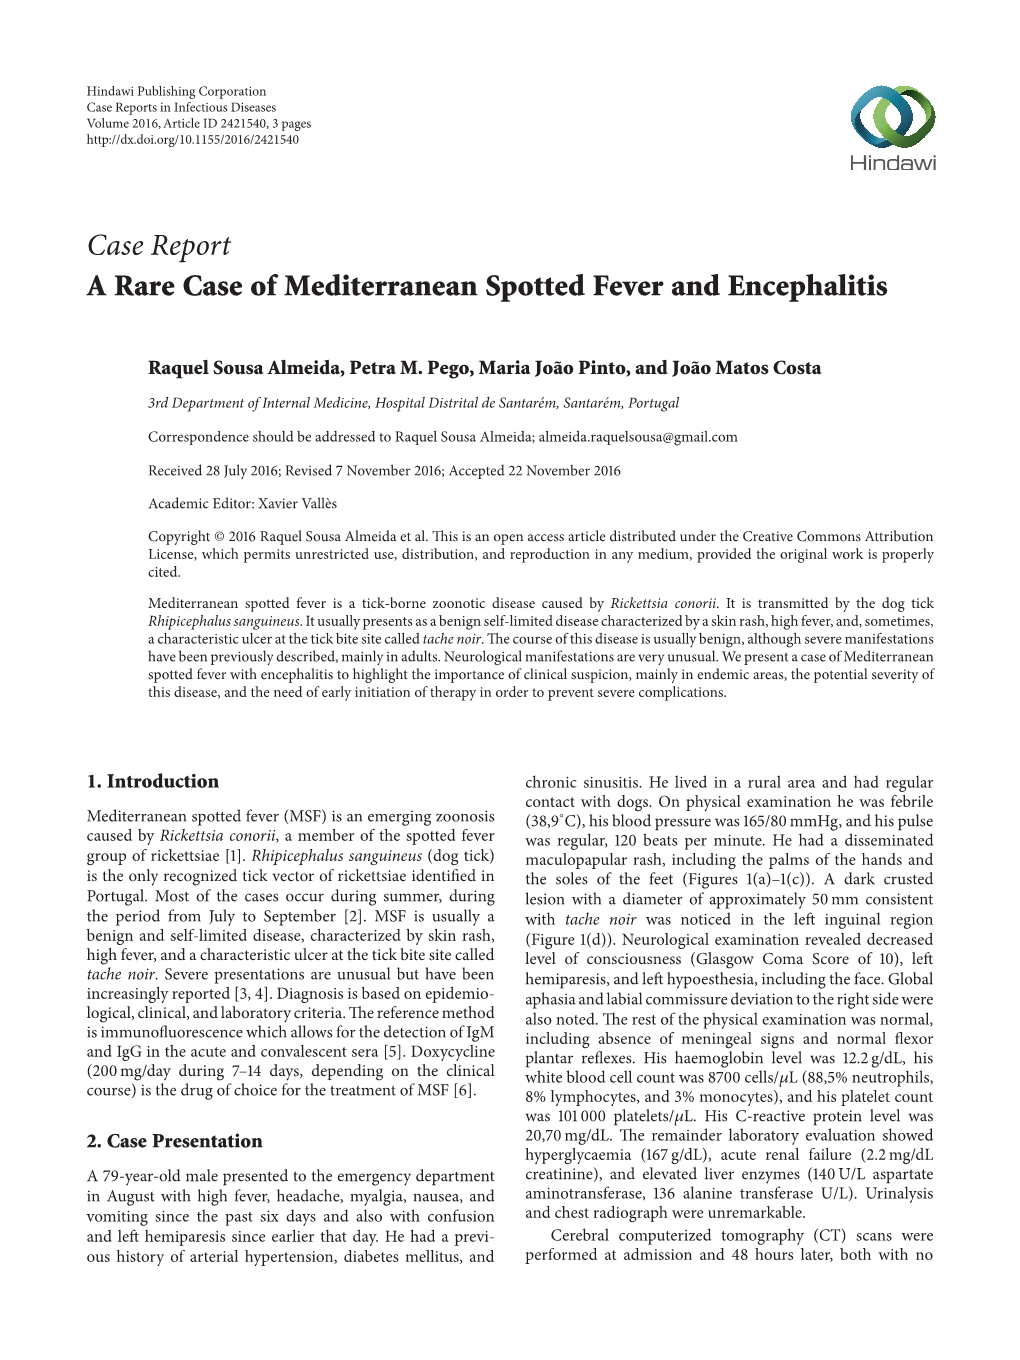 Case Report a Rare Case of Mediterranean Spotted Fever and Encephalitis